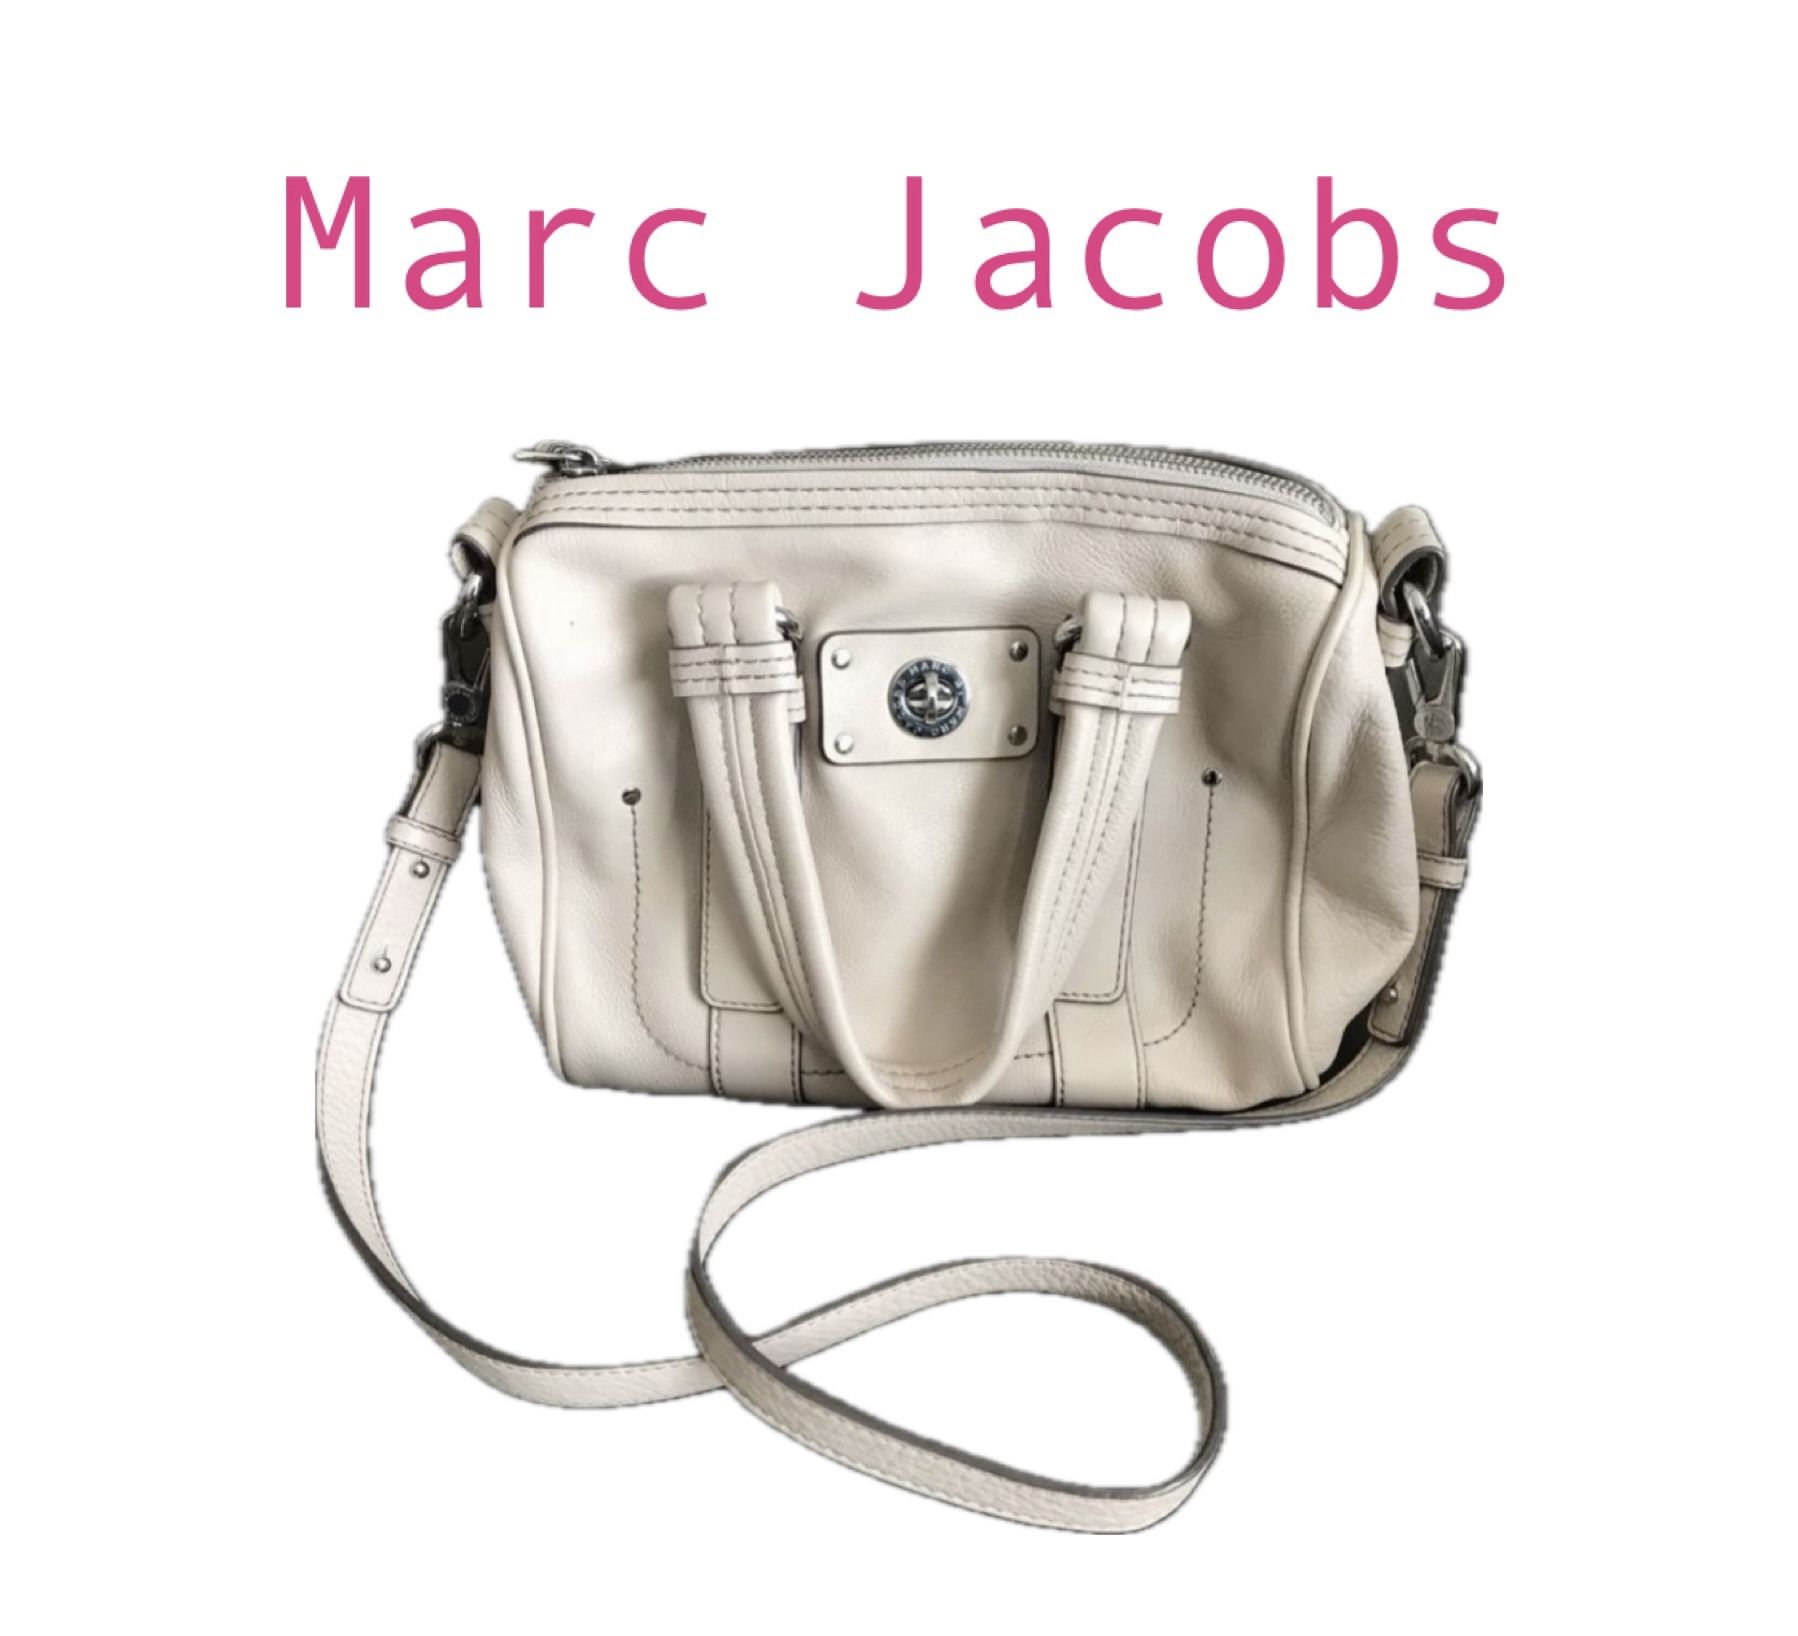 Authentic Marc Jacobs Leather Crossbody Bag (Like New) 